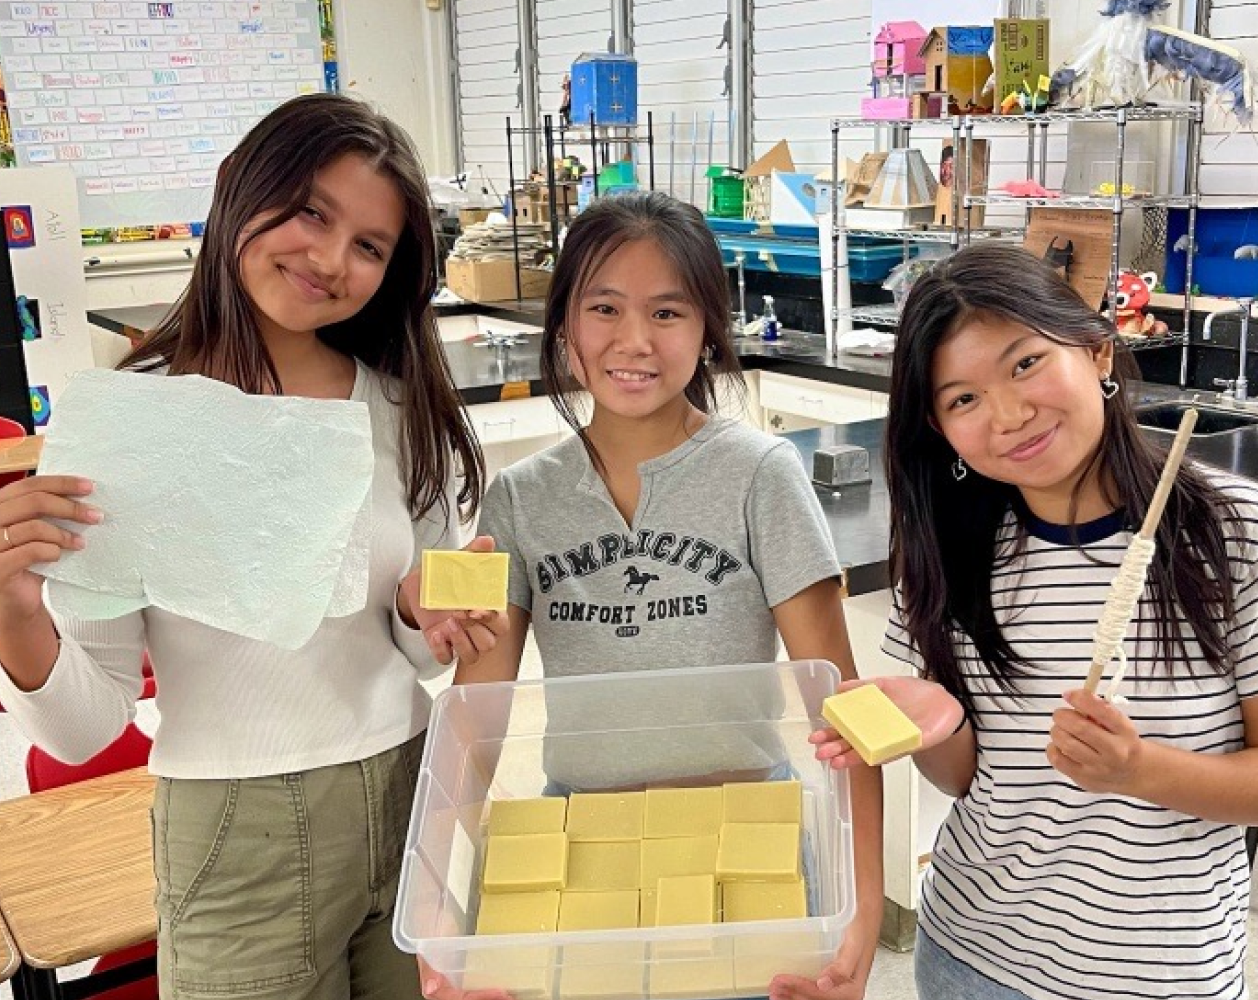 Three smiling students displaying handcrafted items in a classroom.